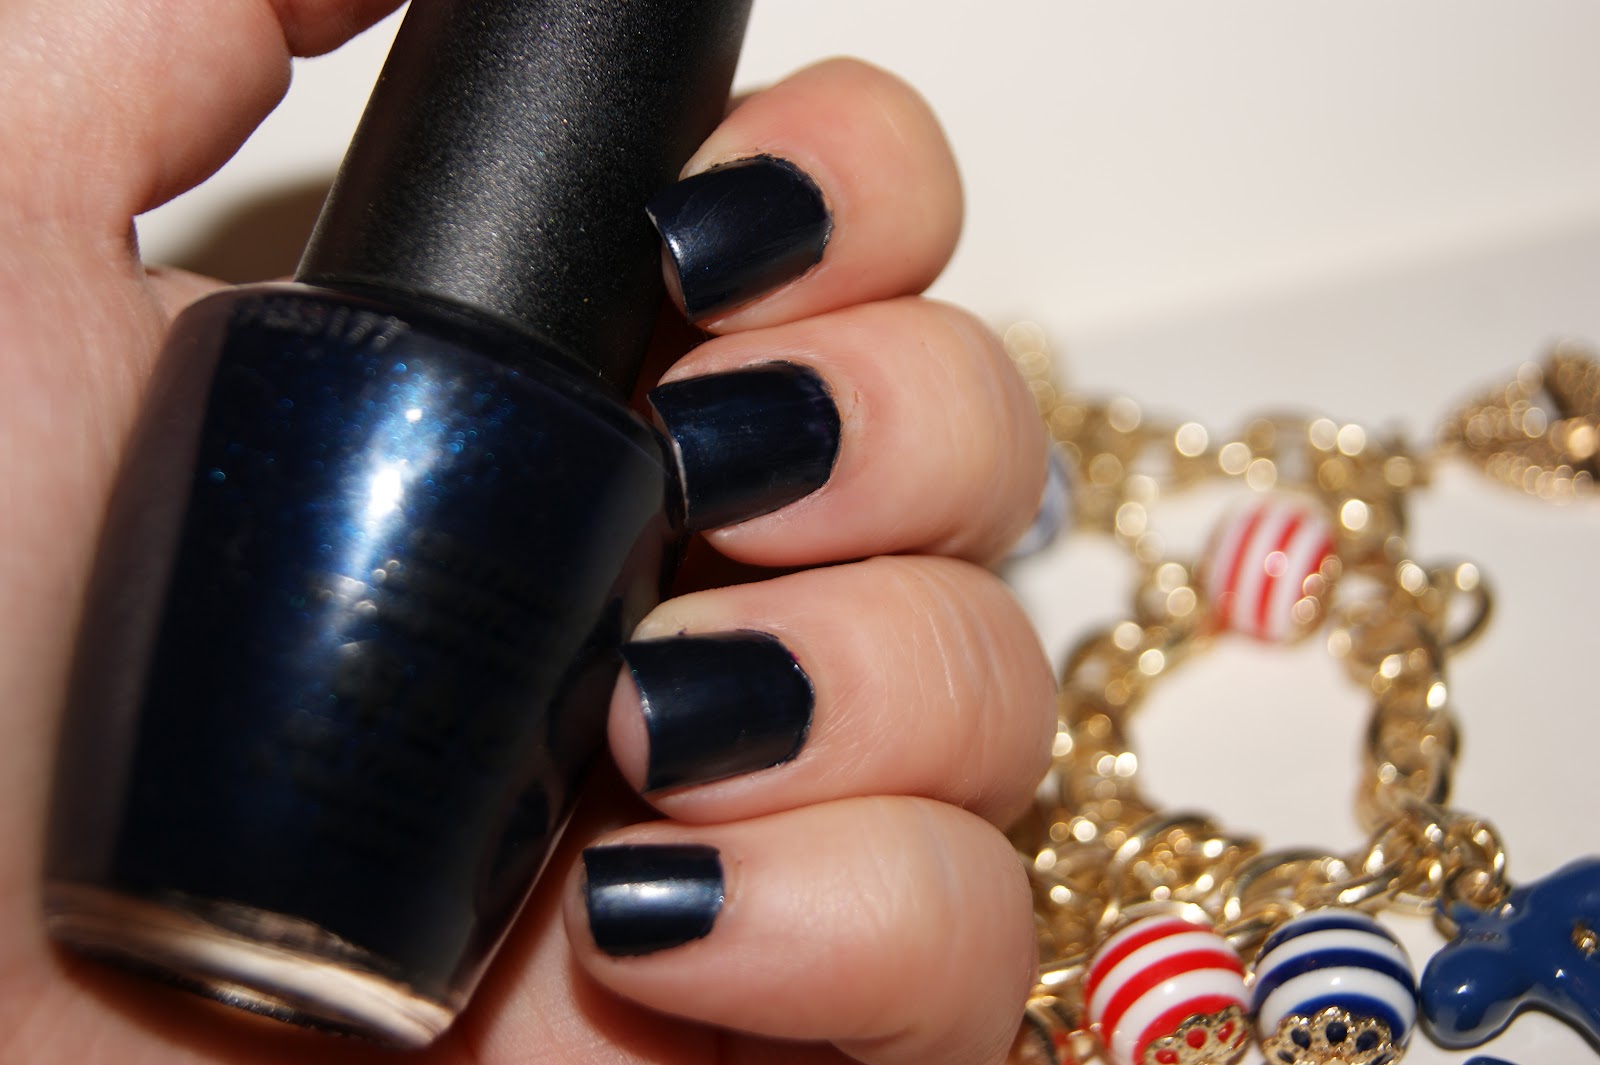 9. OPI Russian Navy - wide 4